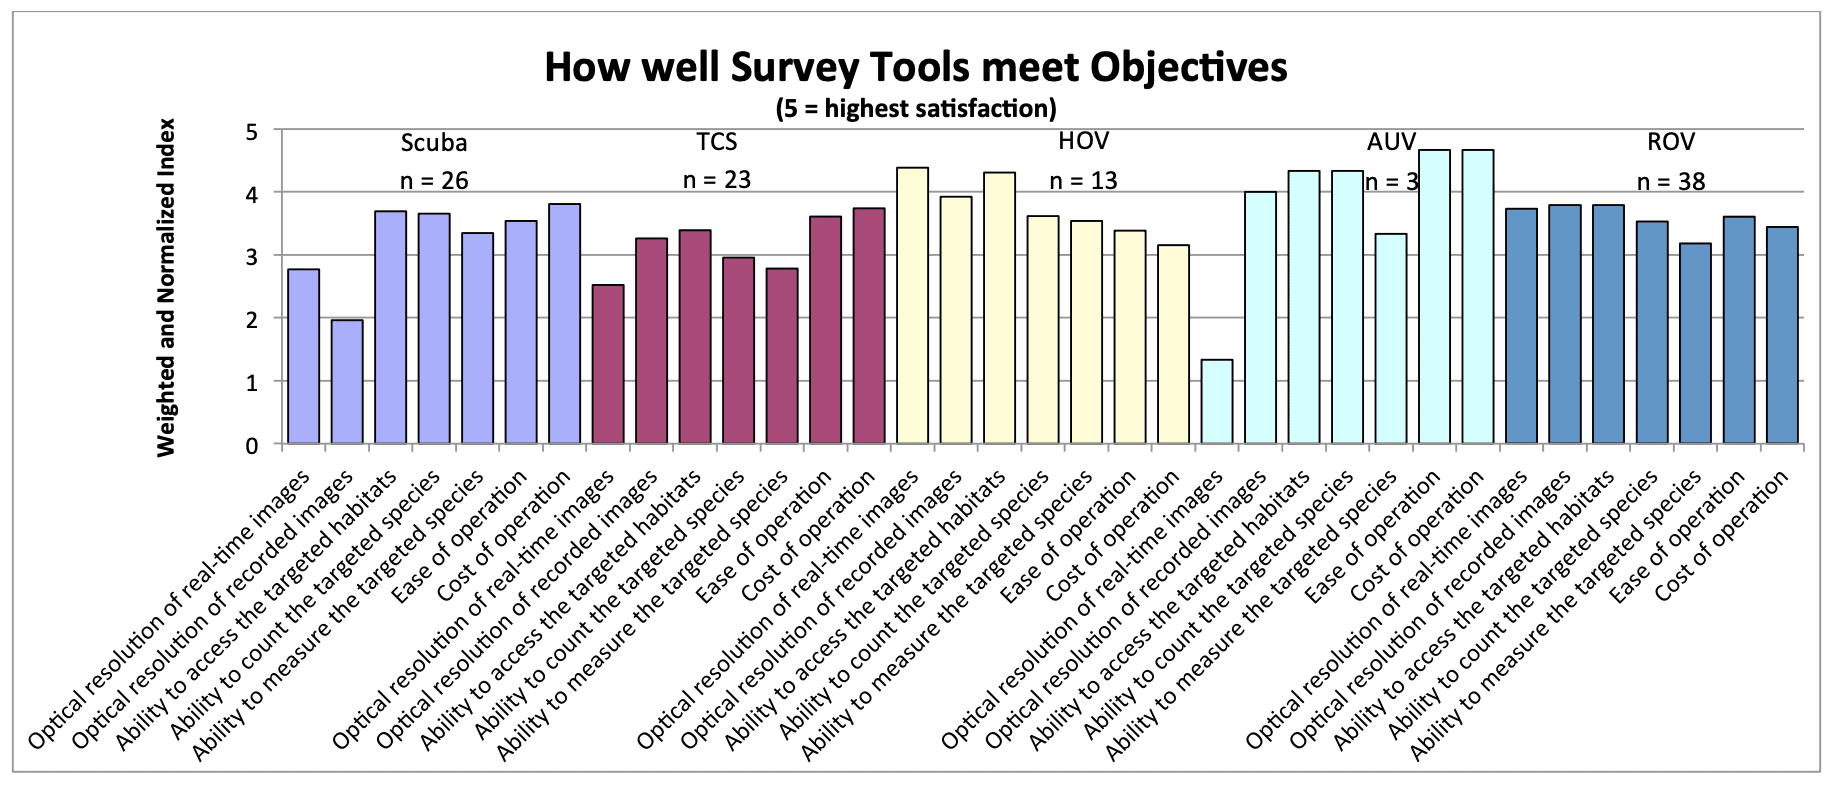 June 2015 - A COMPARATIVE ASSESSMENT OF UNDERWATER VISUAL SURVEY TOOLS: 180